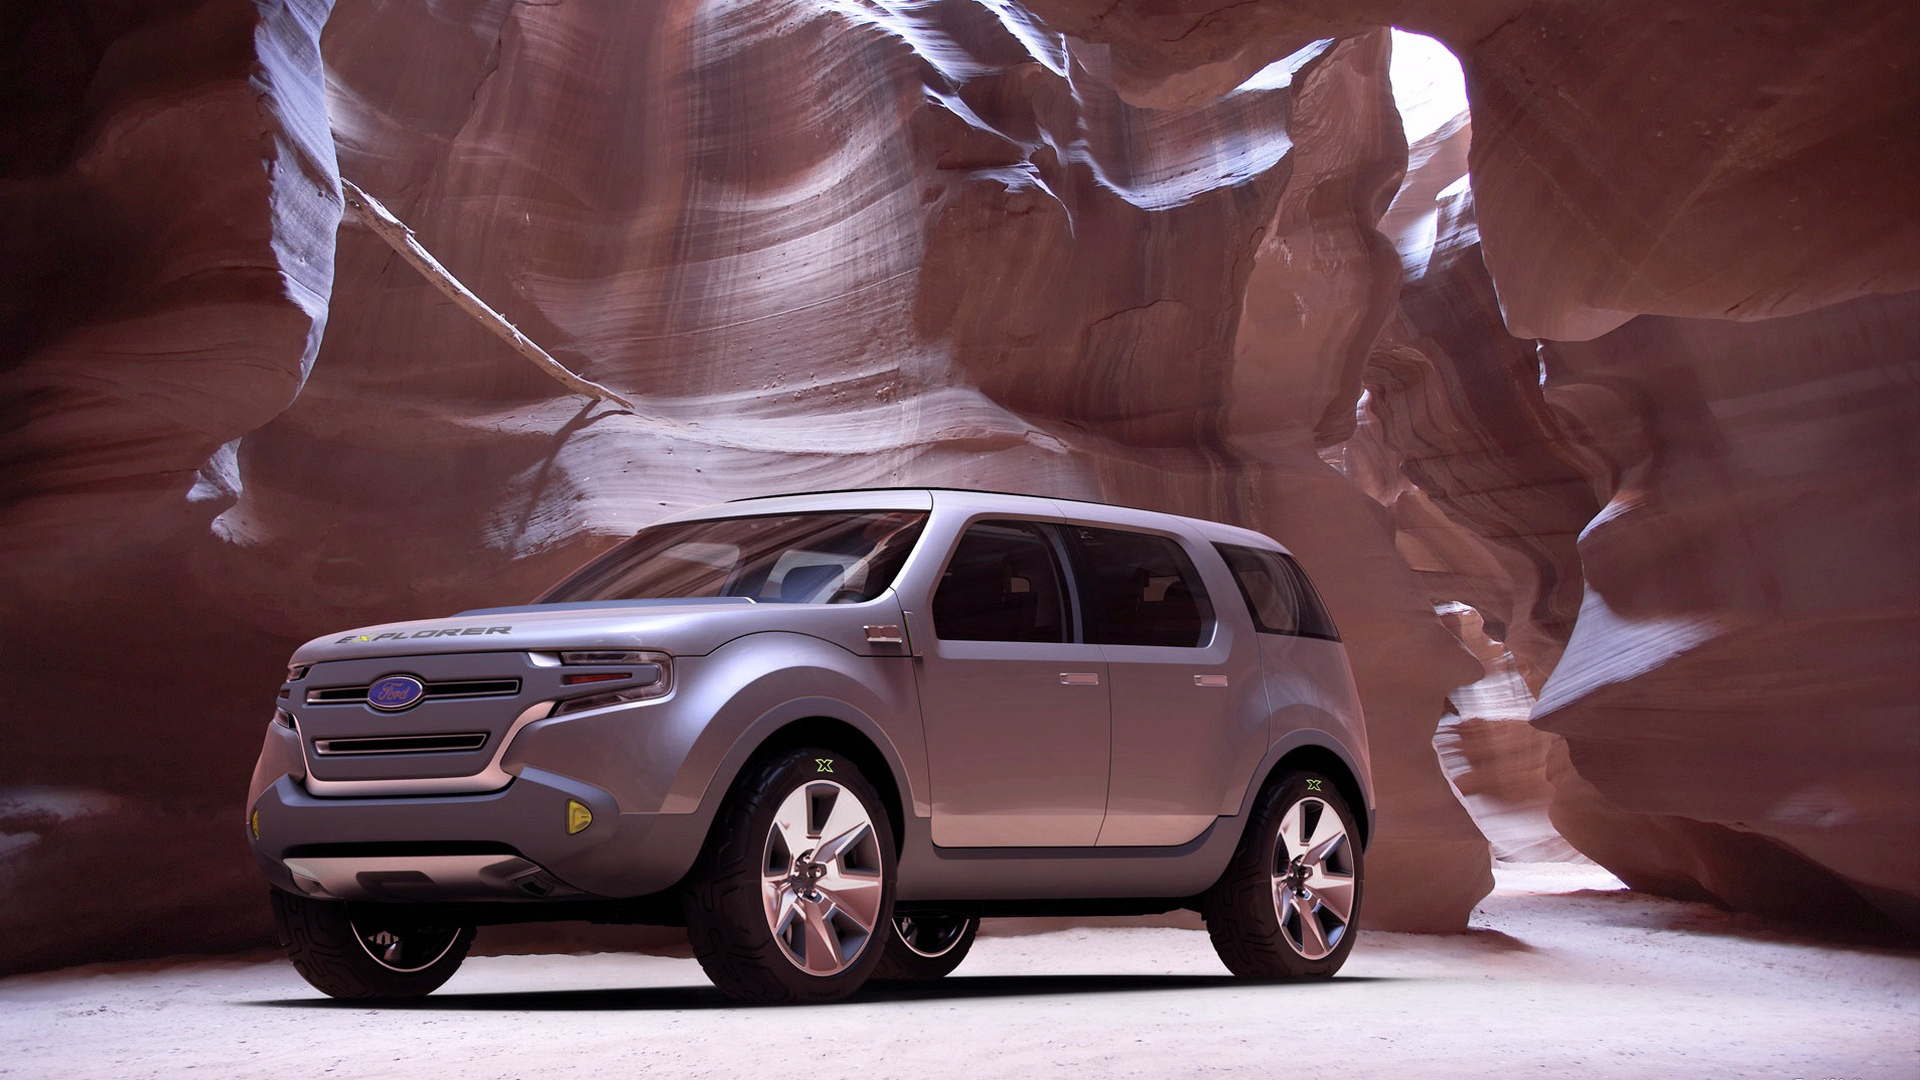 Vehicles 2011 Ford Explorer HD Wallpaper | Background Image